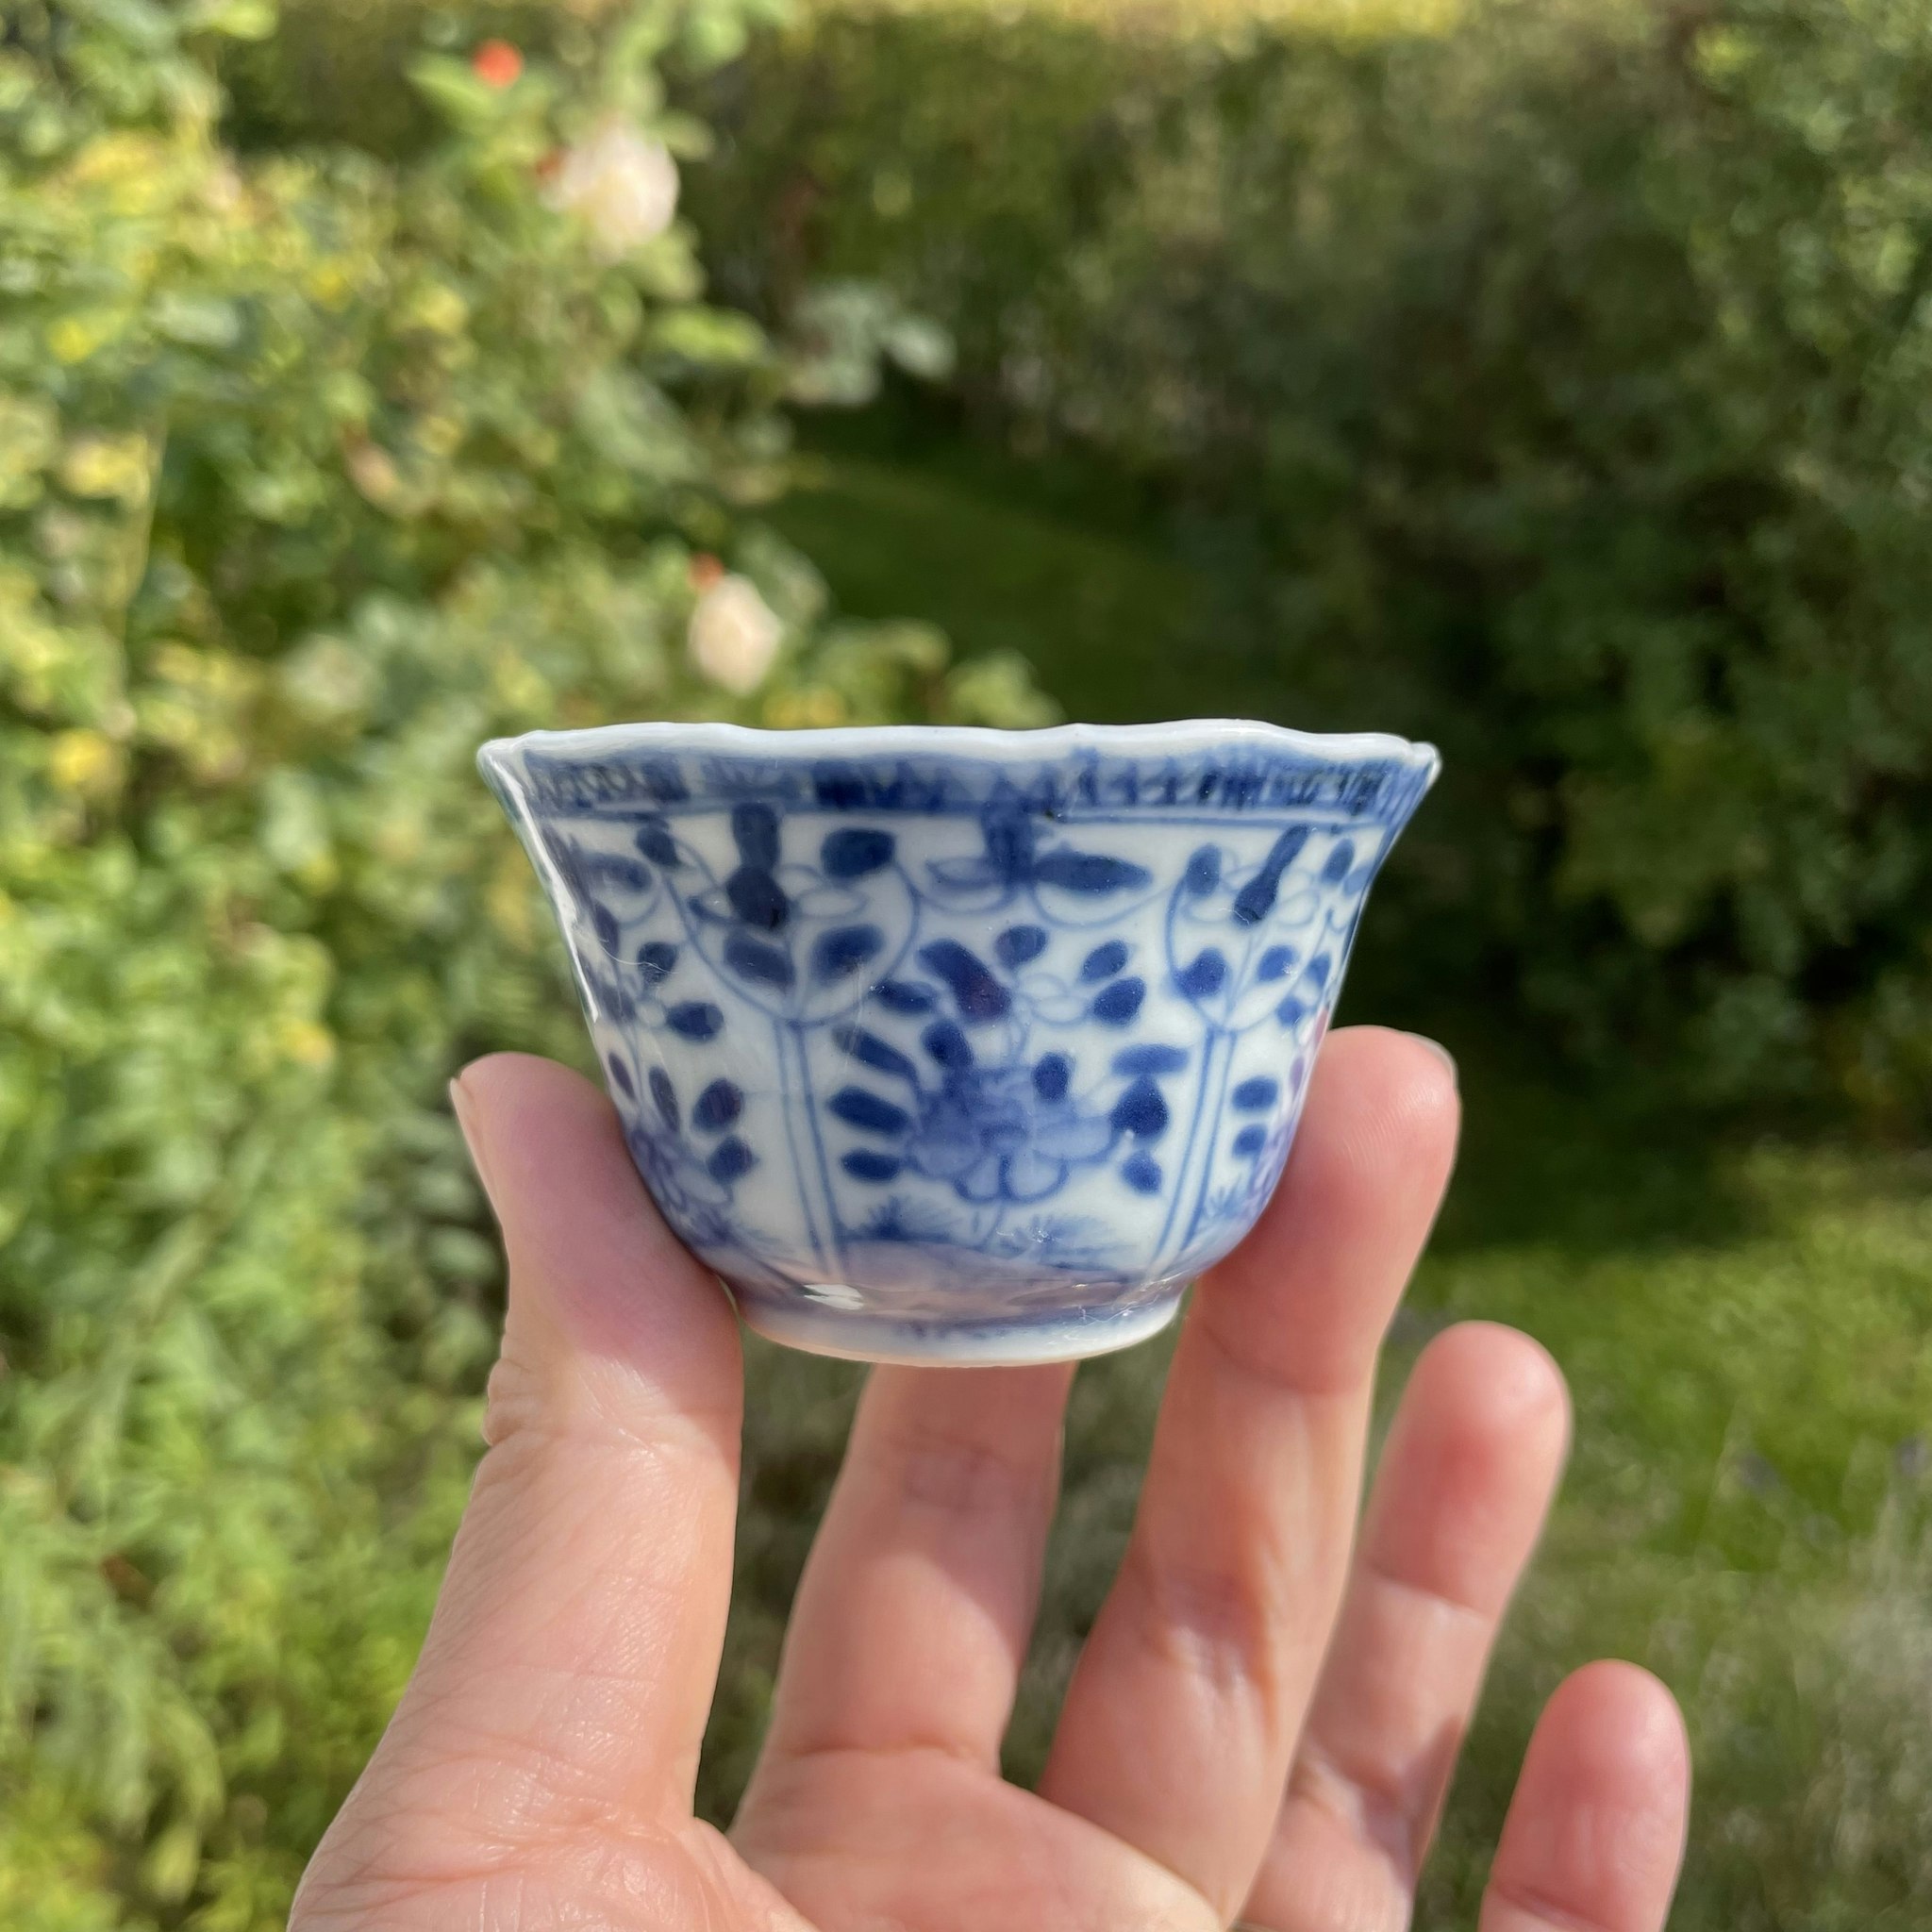 Chinese antique Teacup and Saucer, First Half Of The 18th Century #1653